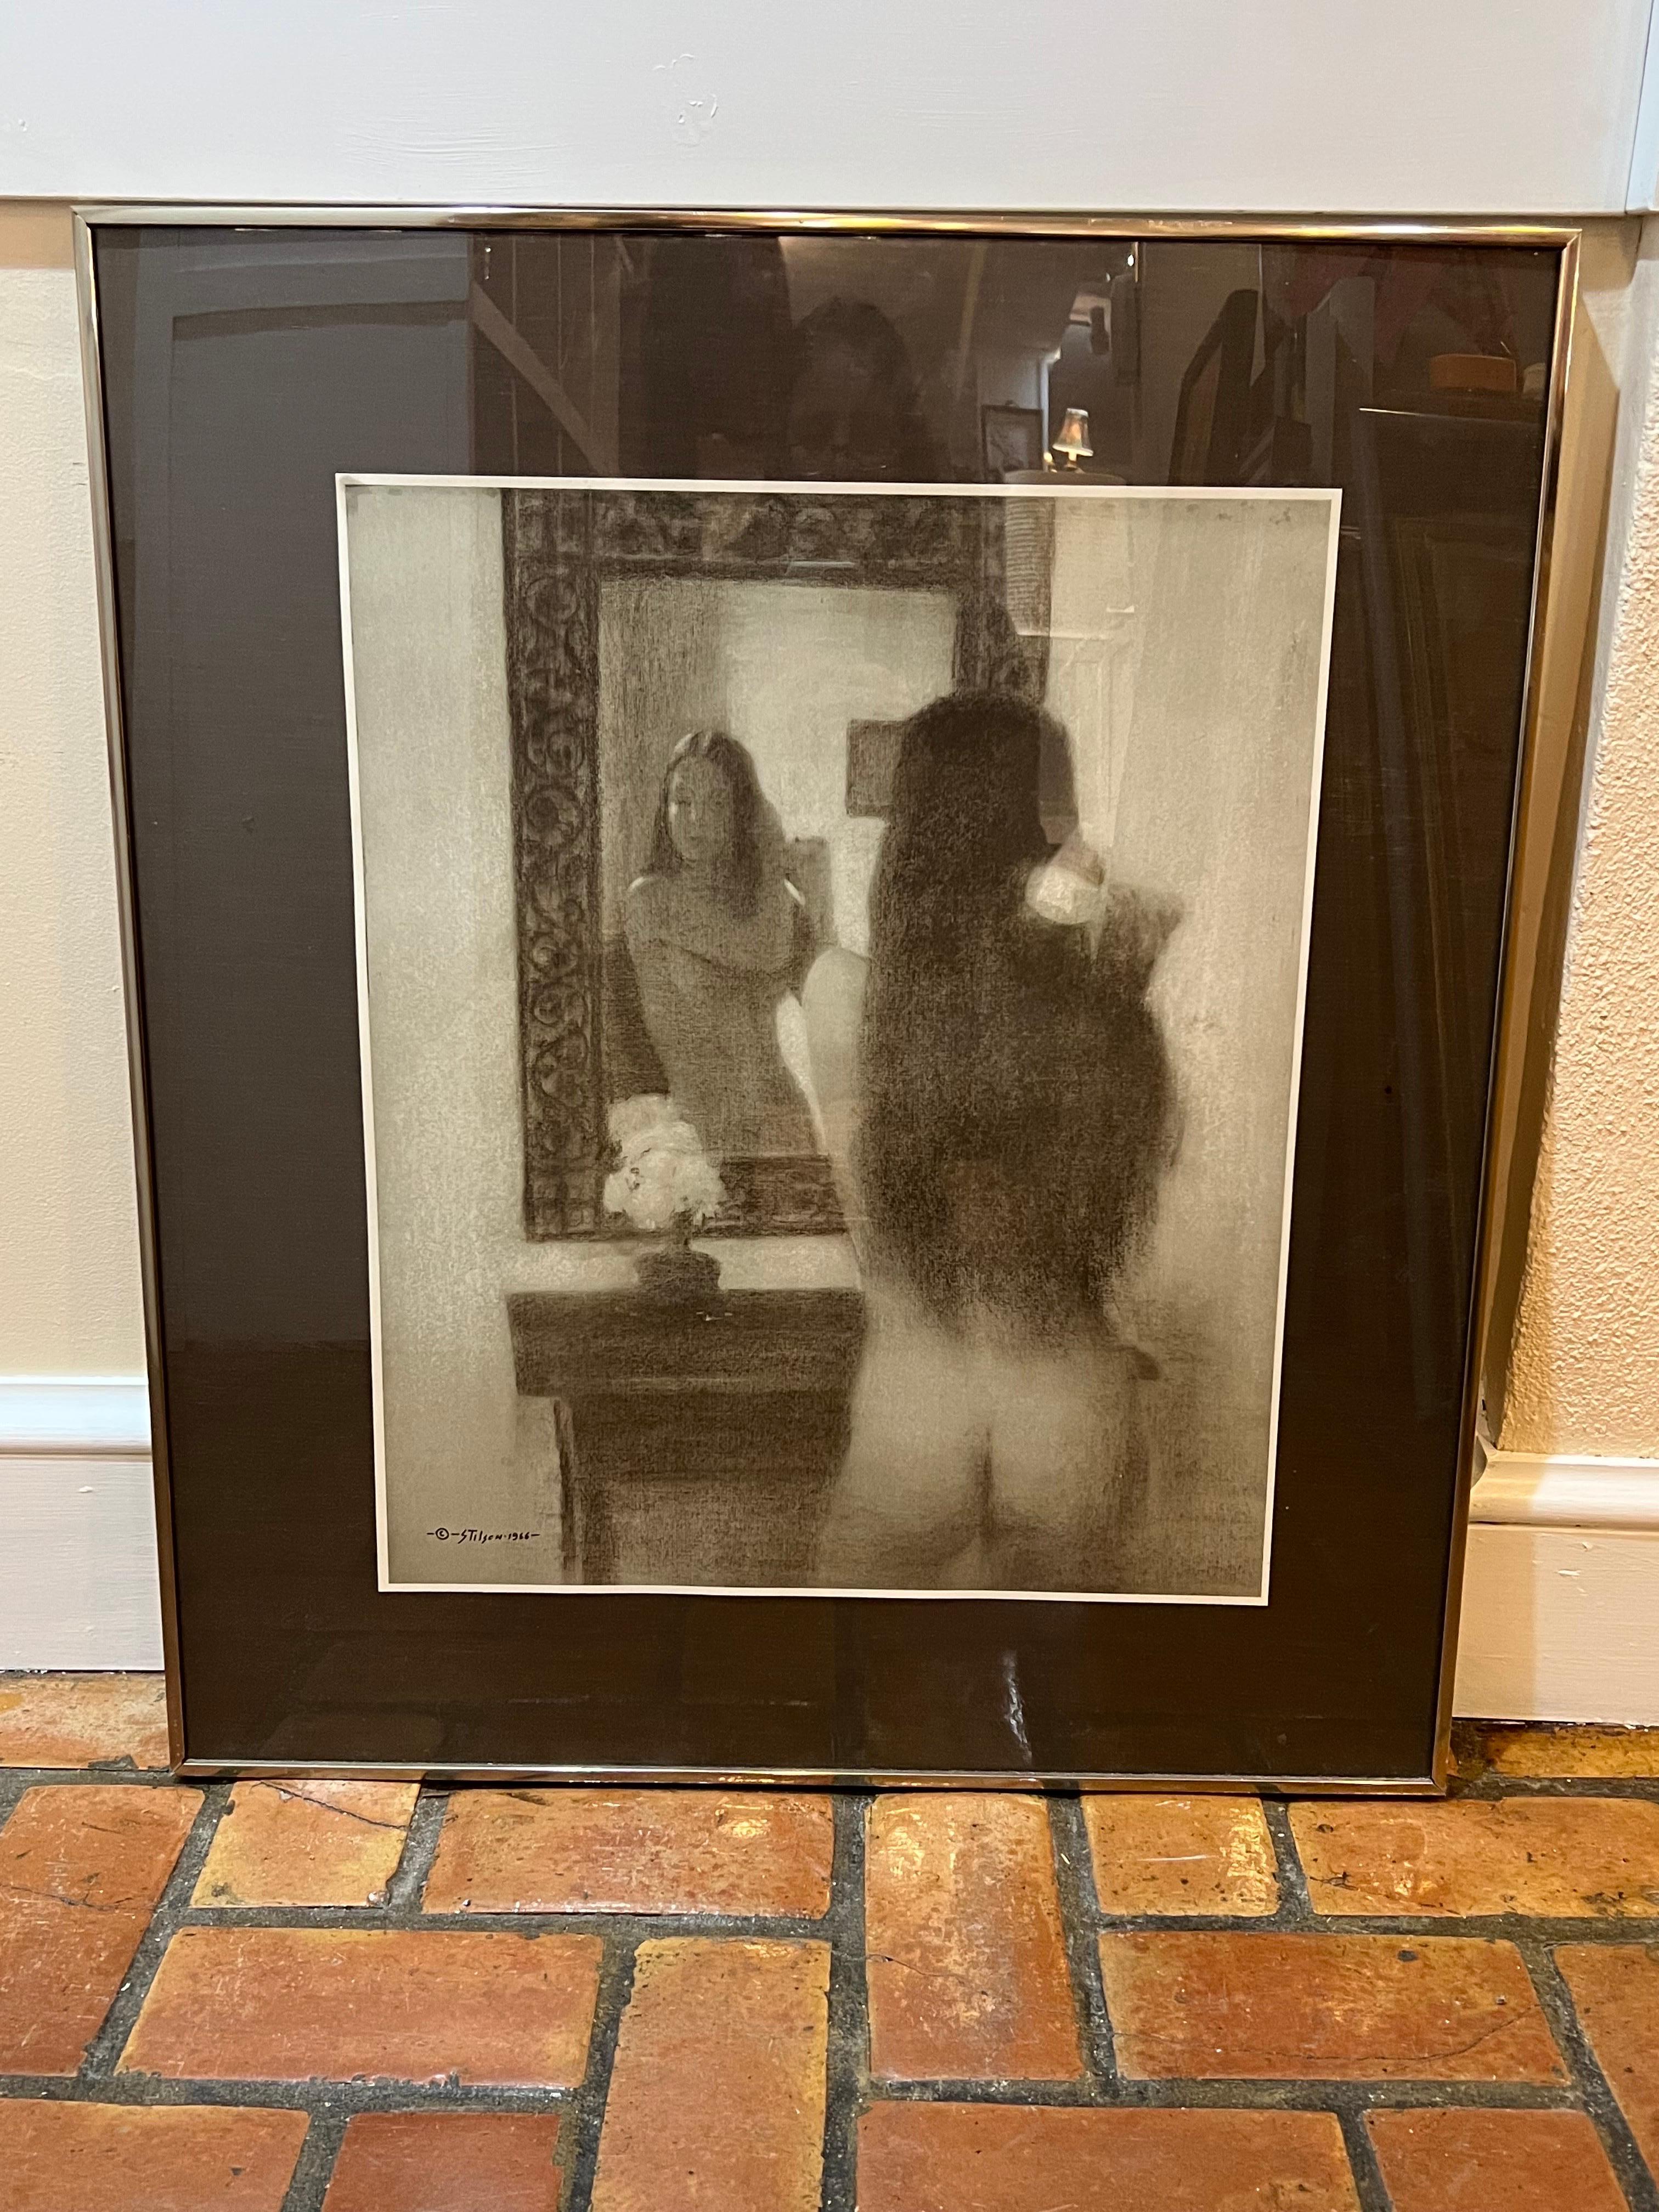 Signed Bill Stilson 1966 nude lithograph. Willian H Stilson was a popular Rockport, Massachusetts artist known for figure, seascape, and genre paintings. This piece titled 